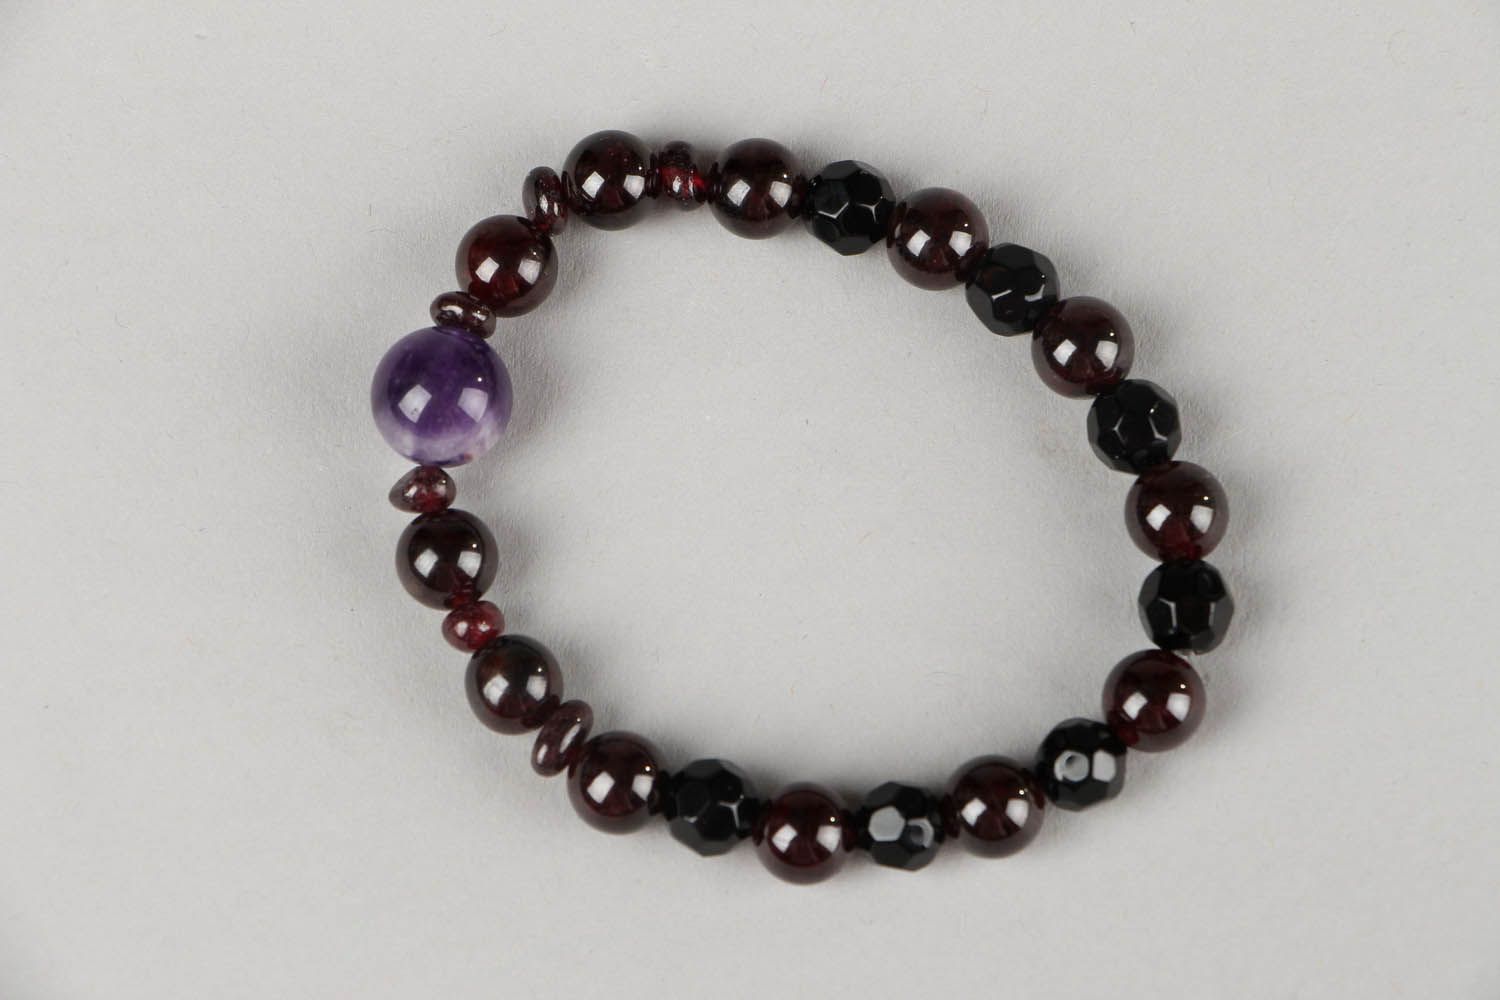 Bracelet made of glass and natural stones photo 3